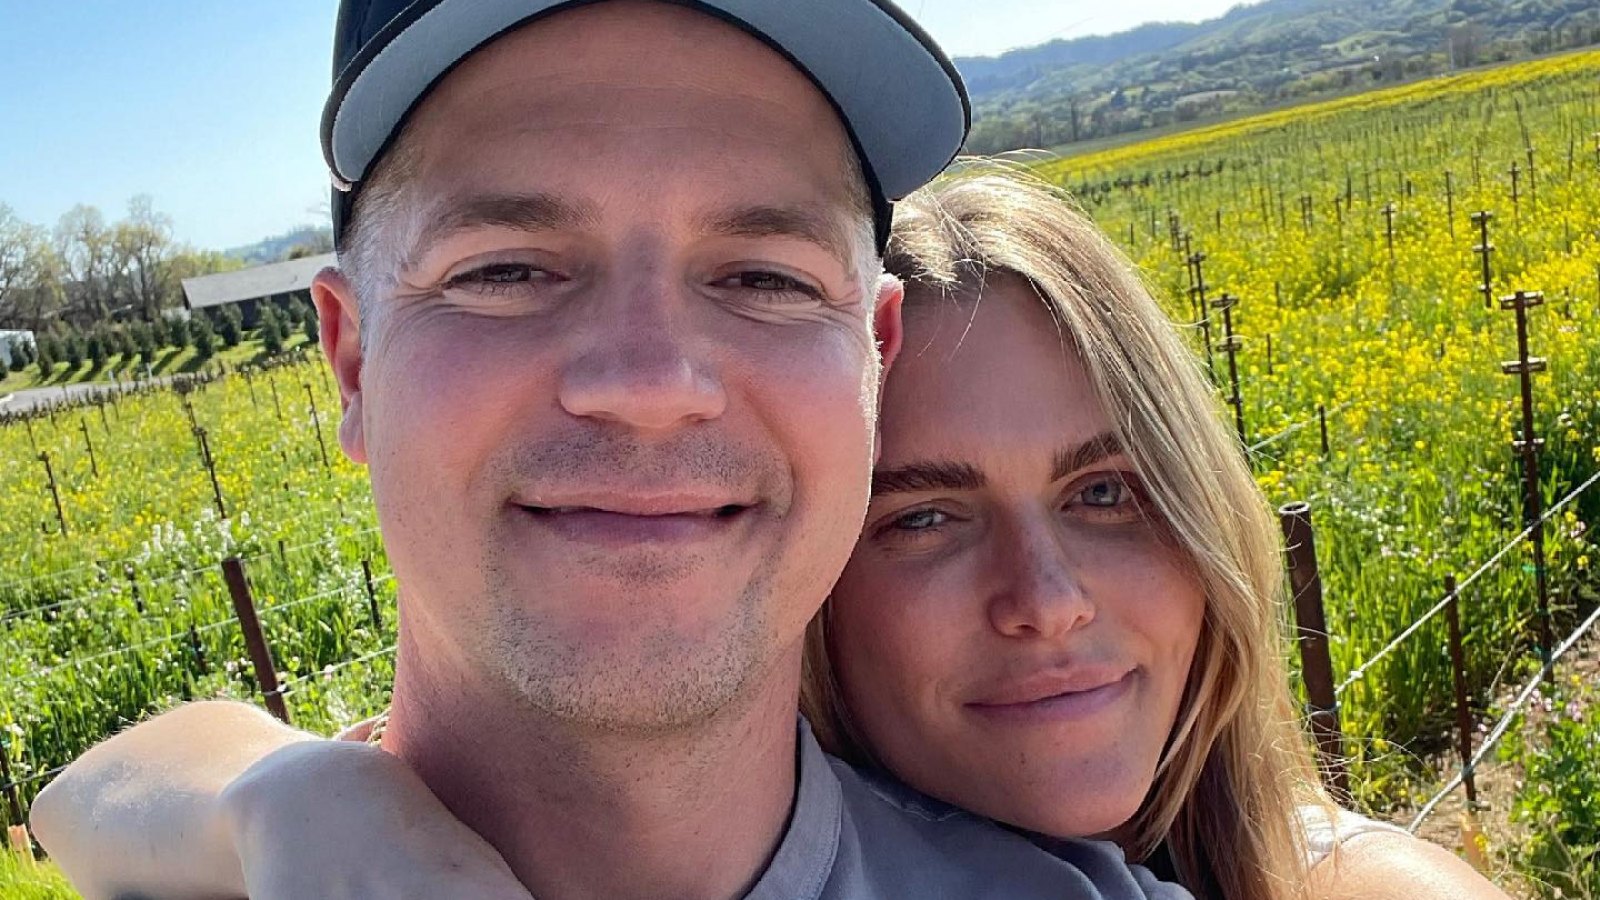 Lauren Scruggs and Jason Kennedy Welcome Their 1st Baby After Fertility Struggles